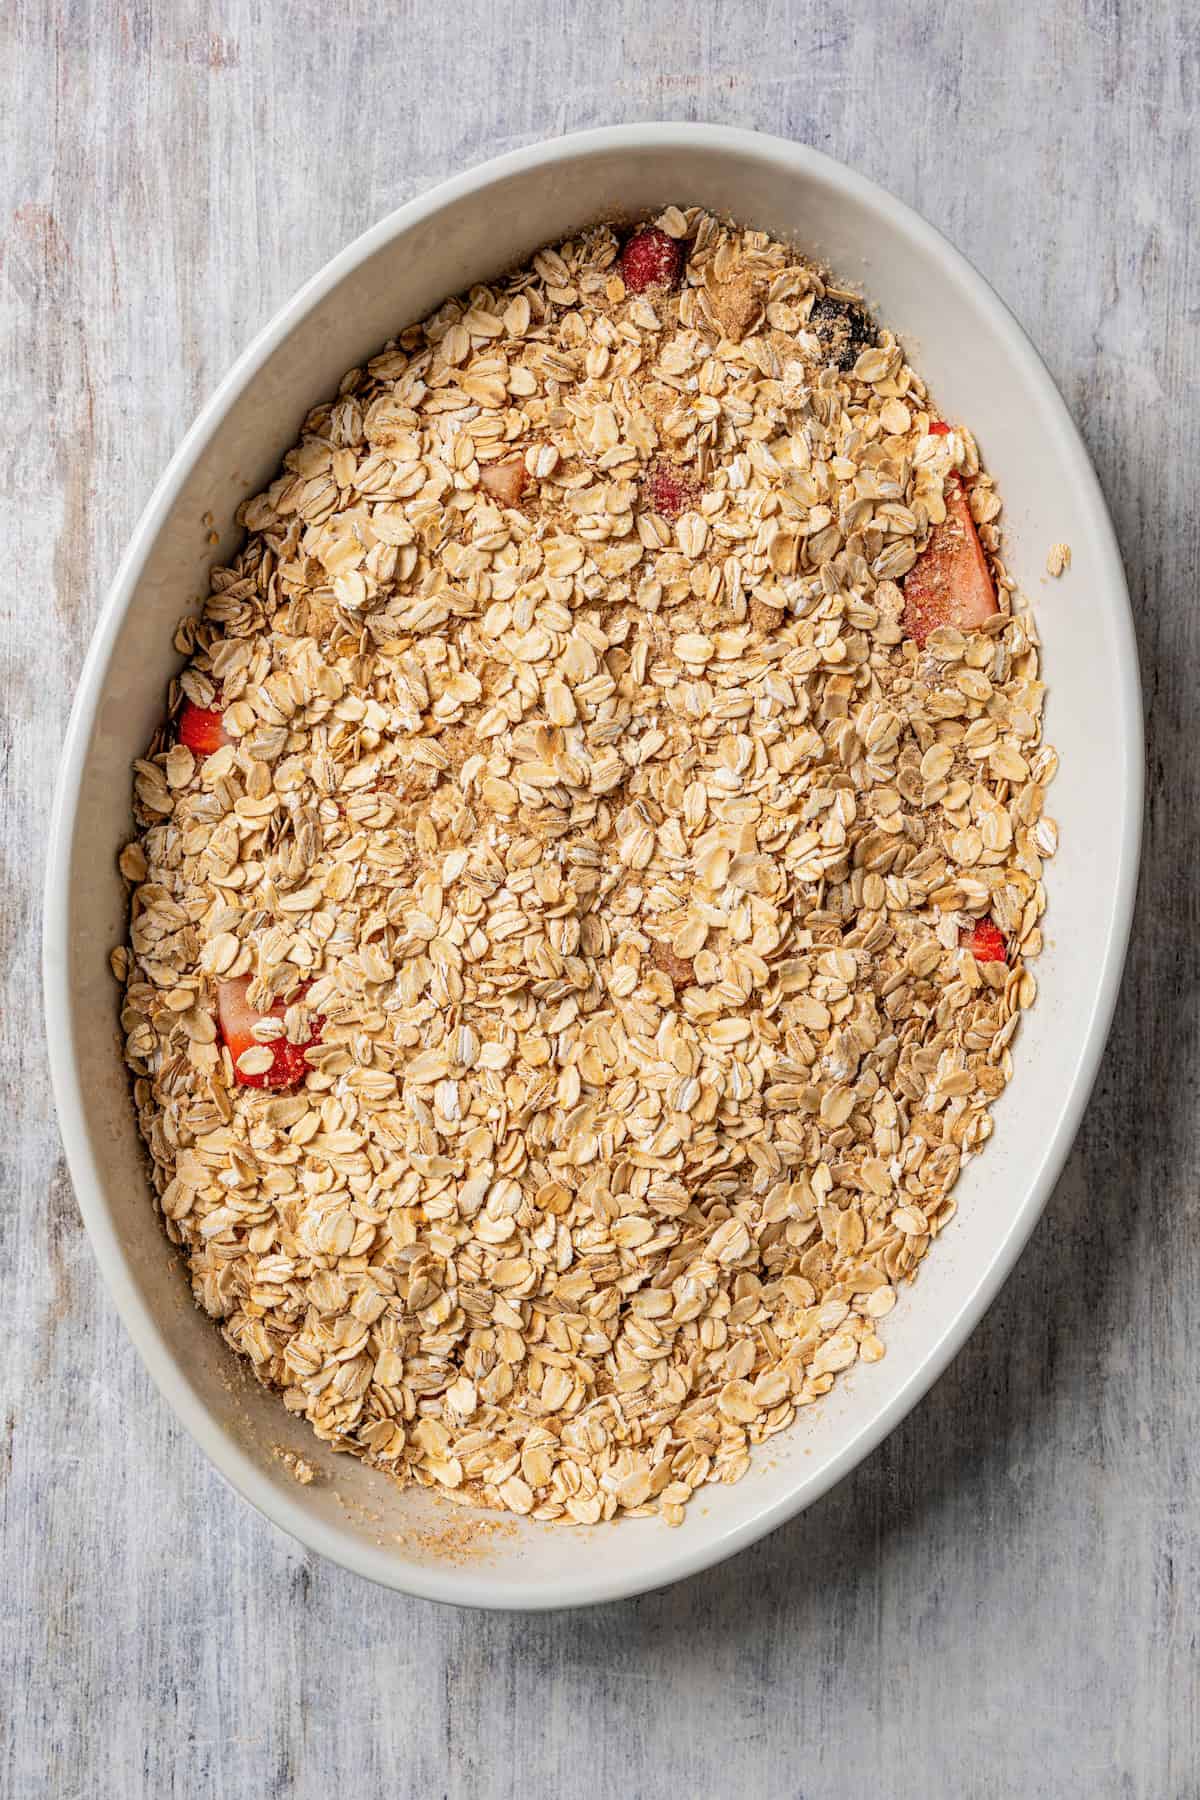 Berries topped with oatmeal in an oval casserole dish.